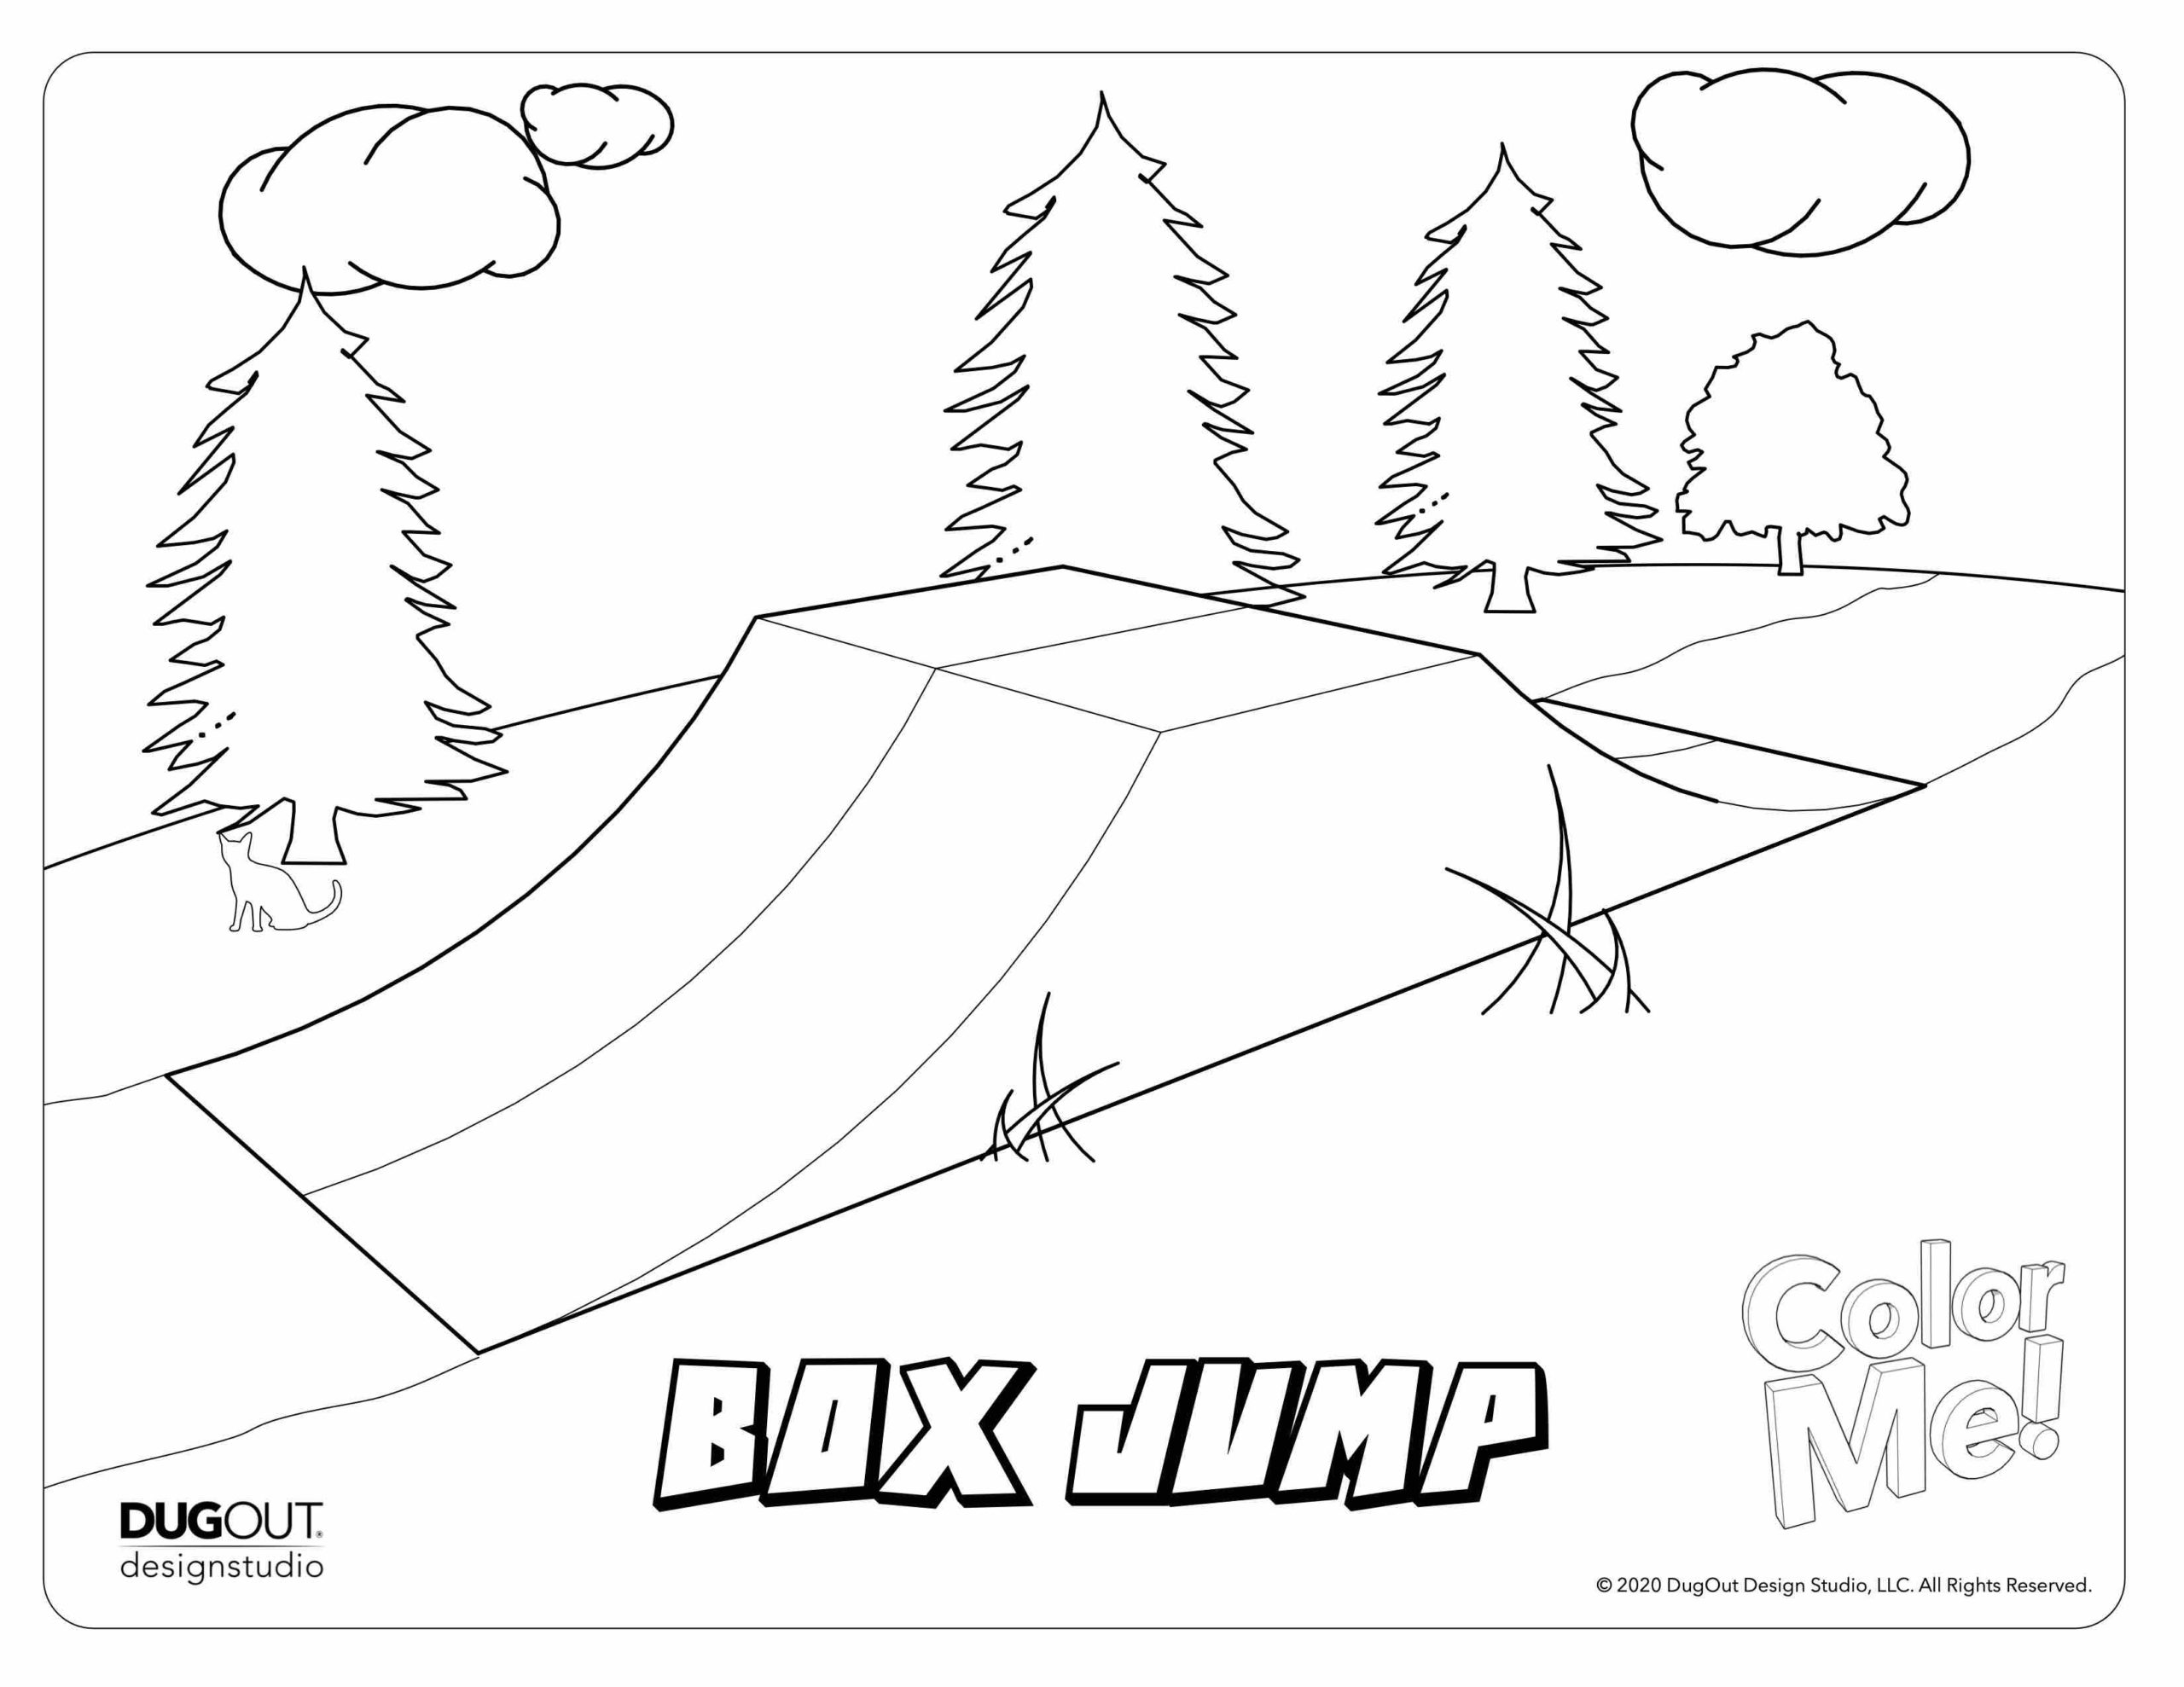 Box Jump coloring page in forest setting